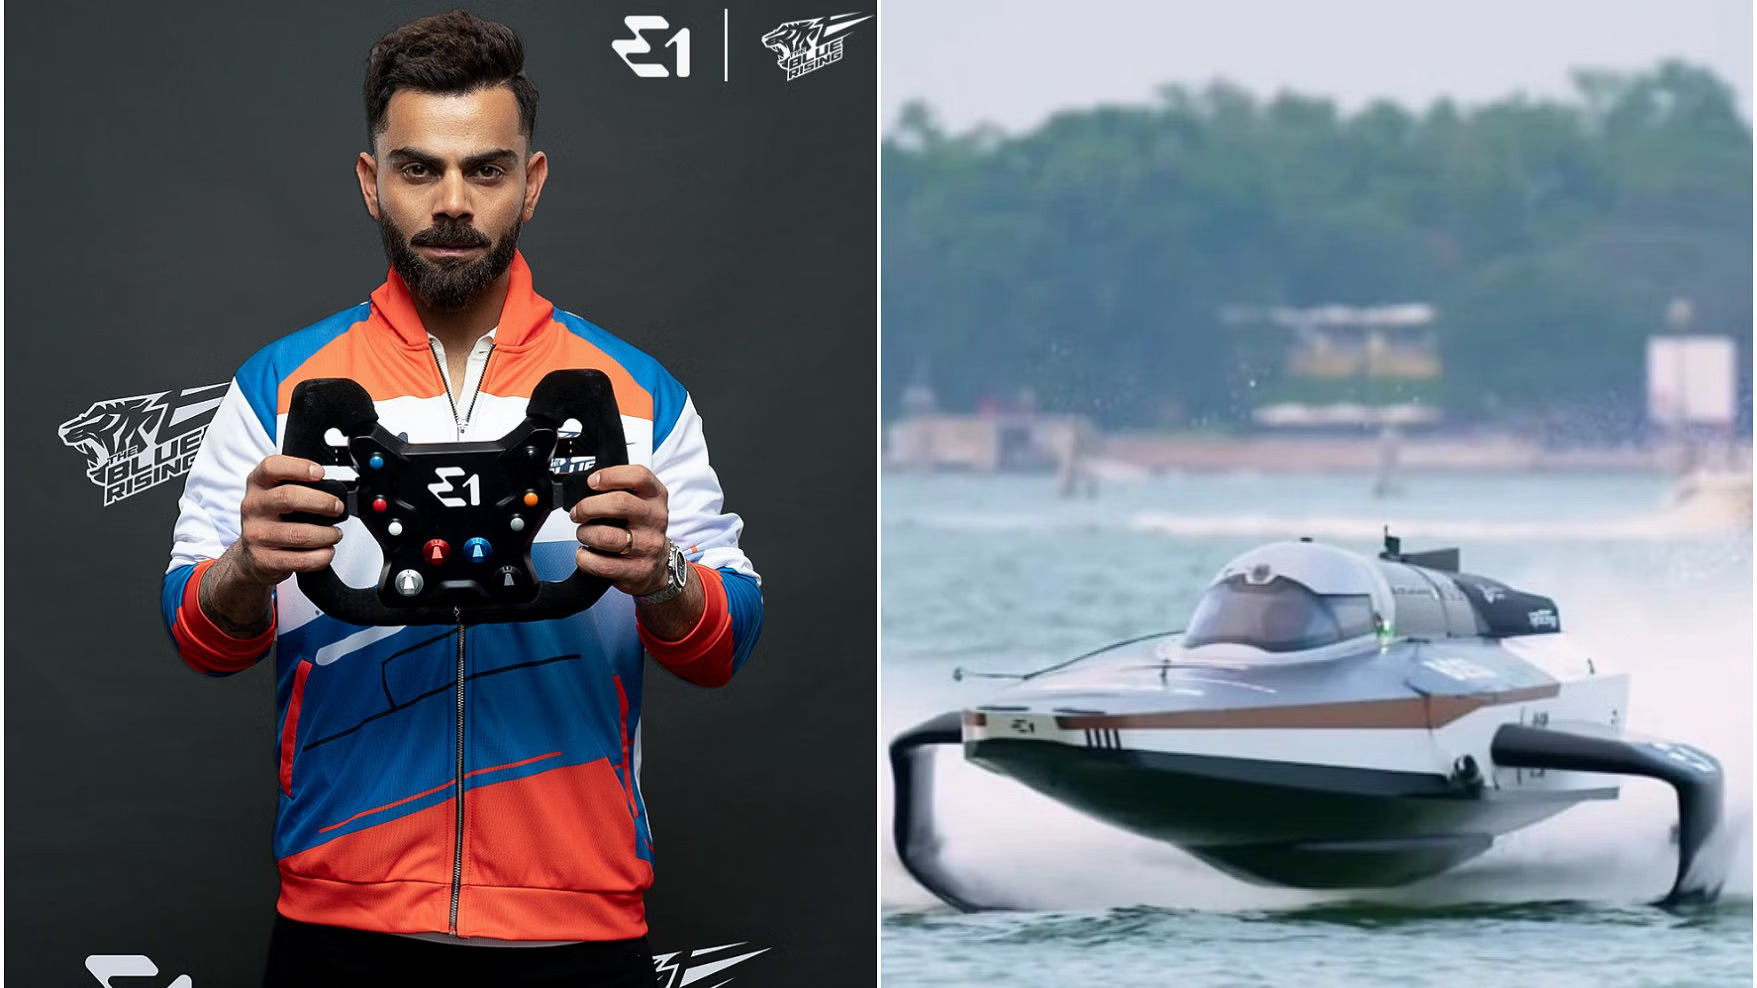 Cricketer Virat Kohli Becomes Owner Of The Blue Rising Team In E1 Electric Raceboat Series